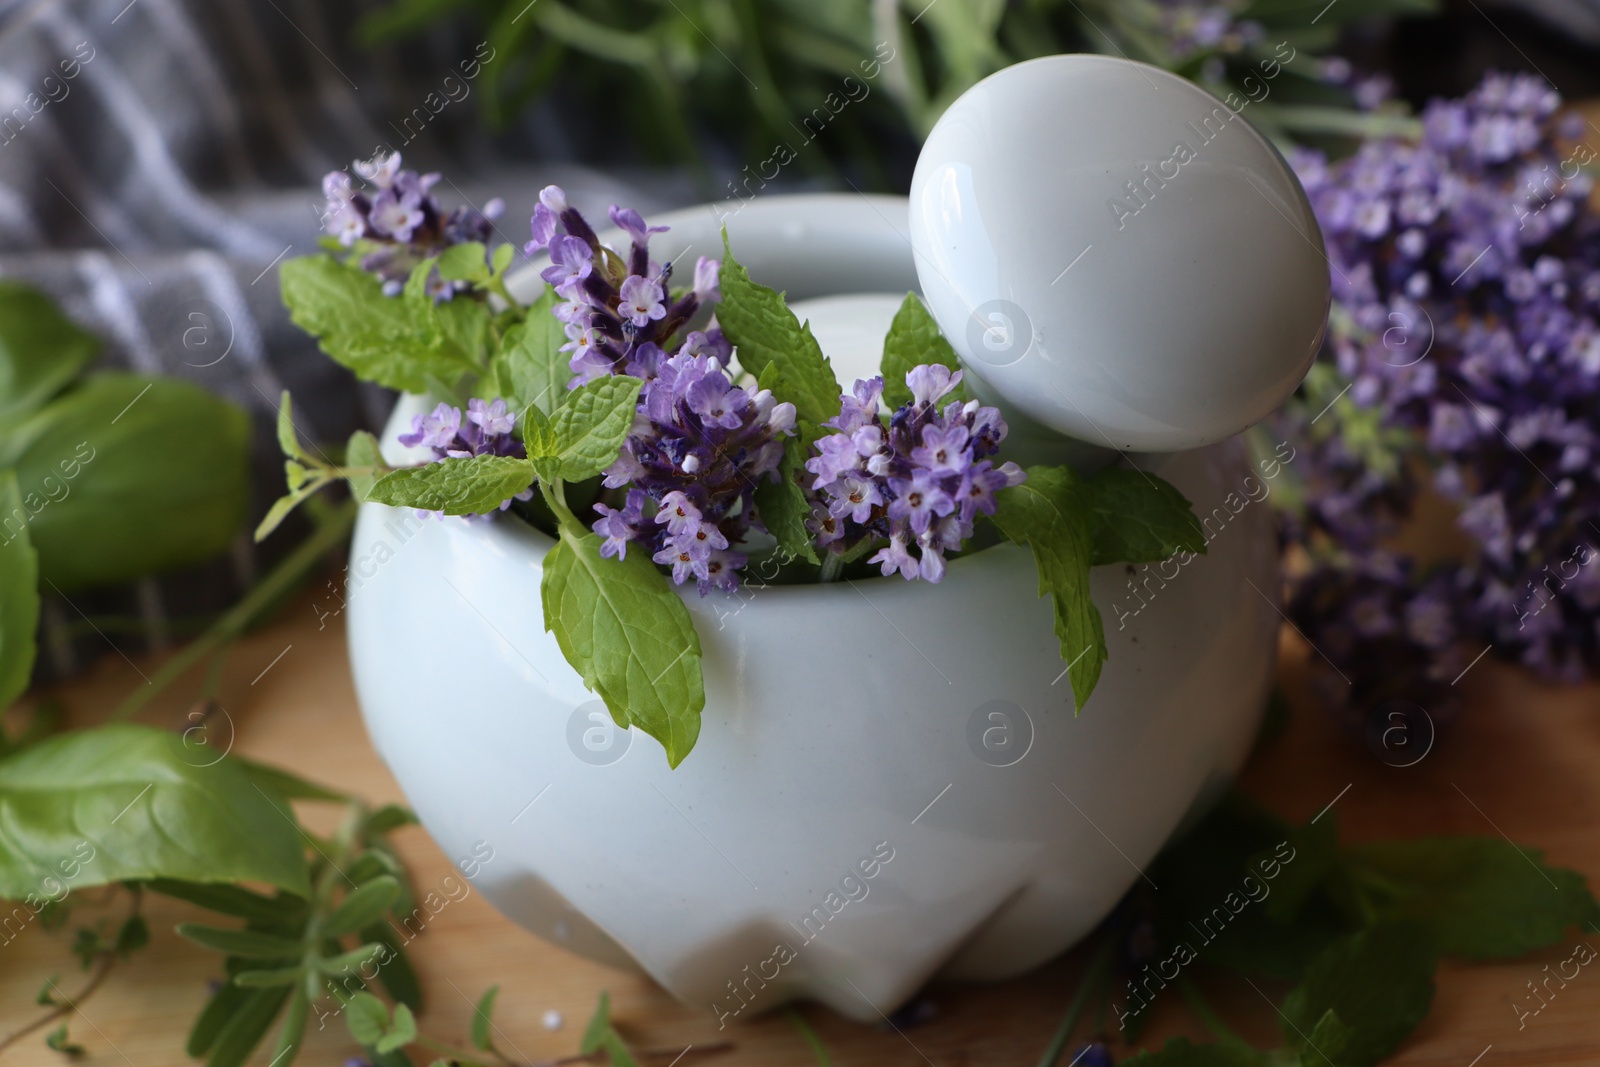 Photo of Mortar with fresh lavender flowers, mint and pestle on table, closeup